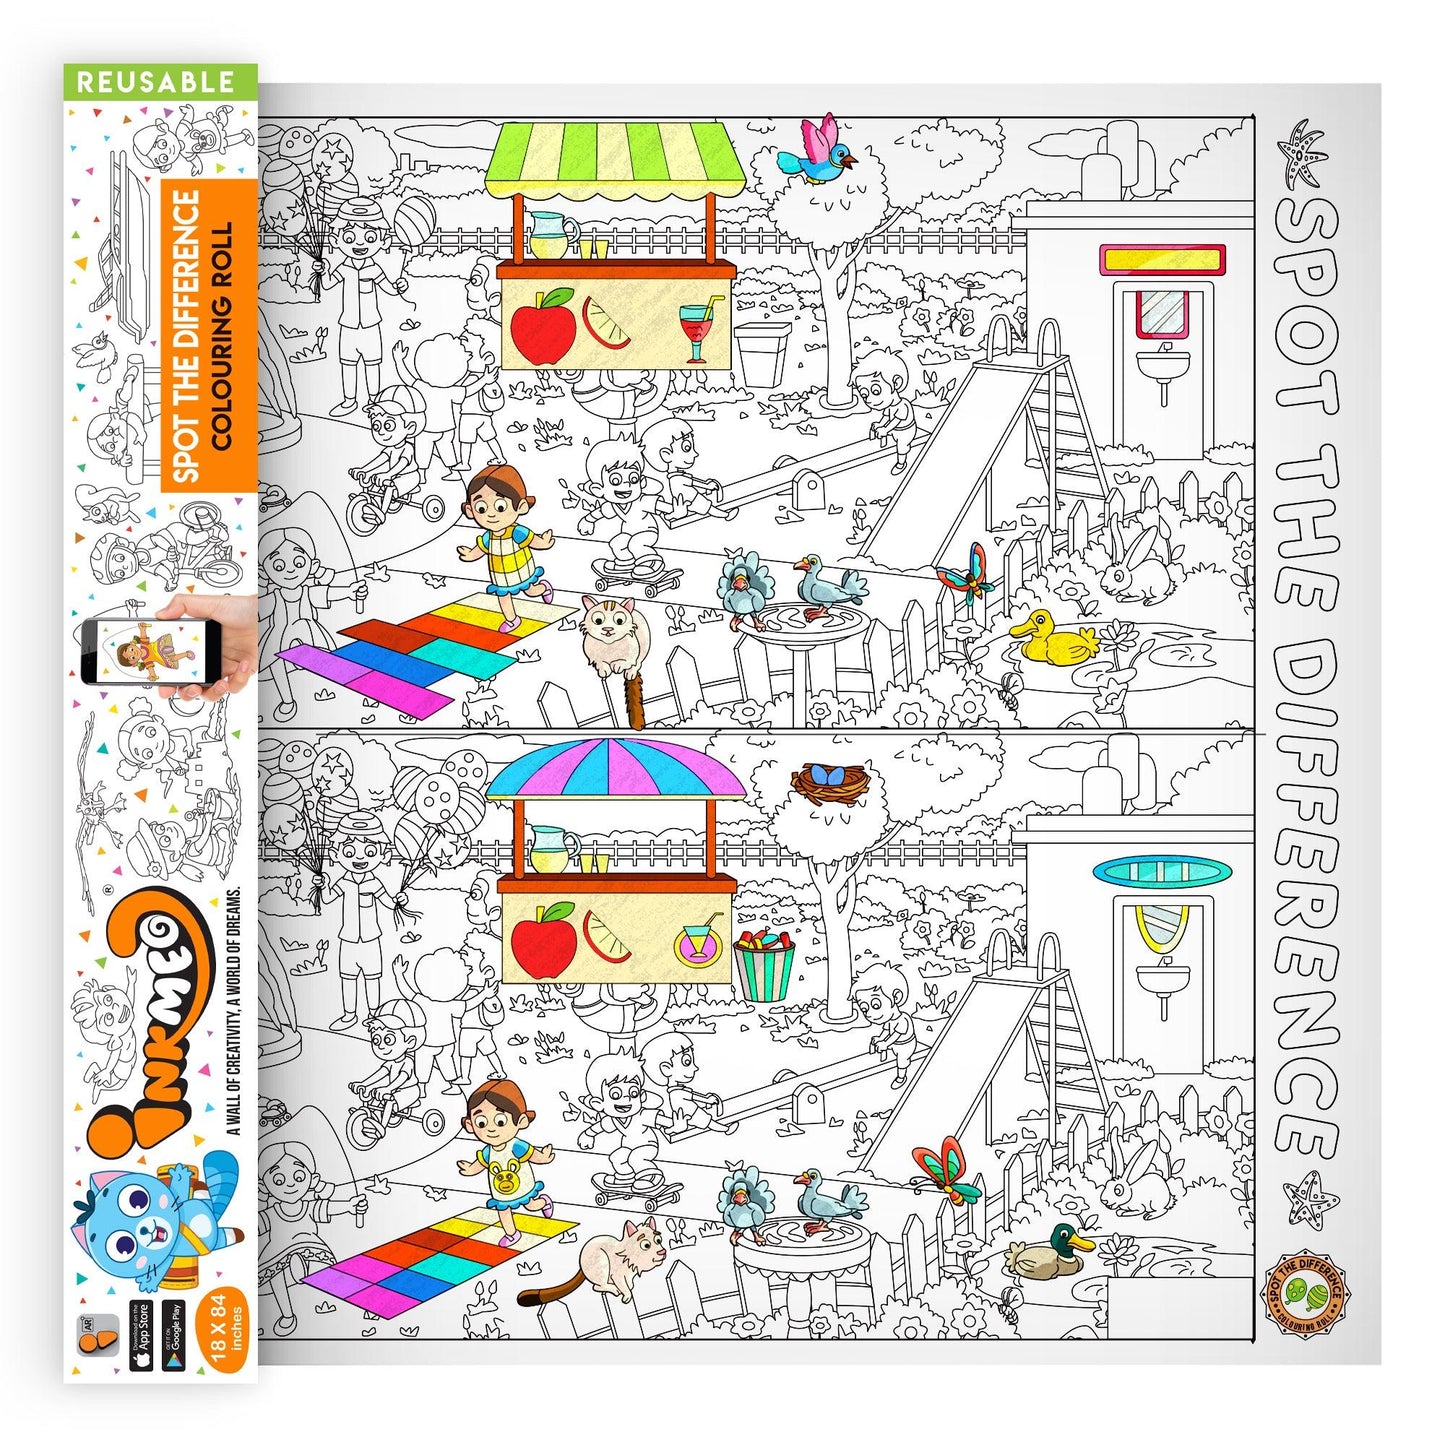  The image depicts a orange box with a roll opened from inside it alongside a colourful picture.